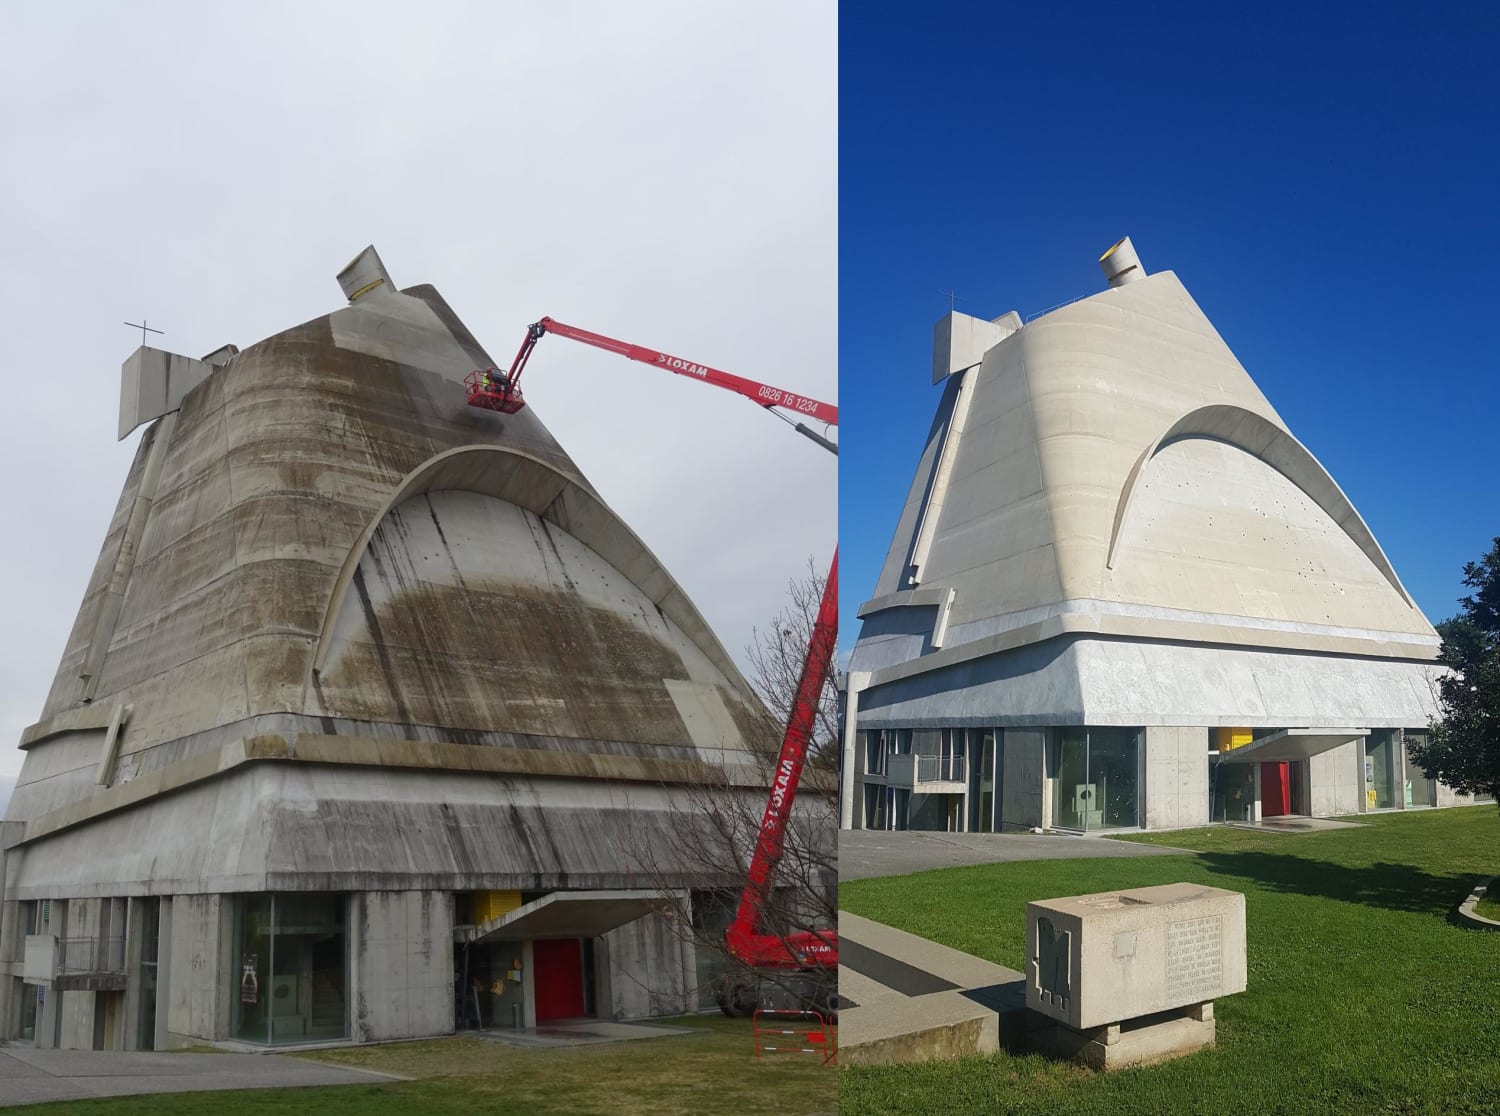 The St. Pierre Church in Firminy, France, by architect Le Corbusier, got it's first ever powerwash.